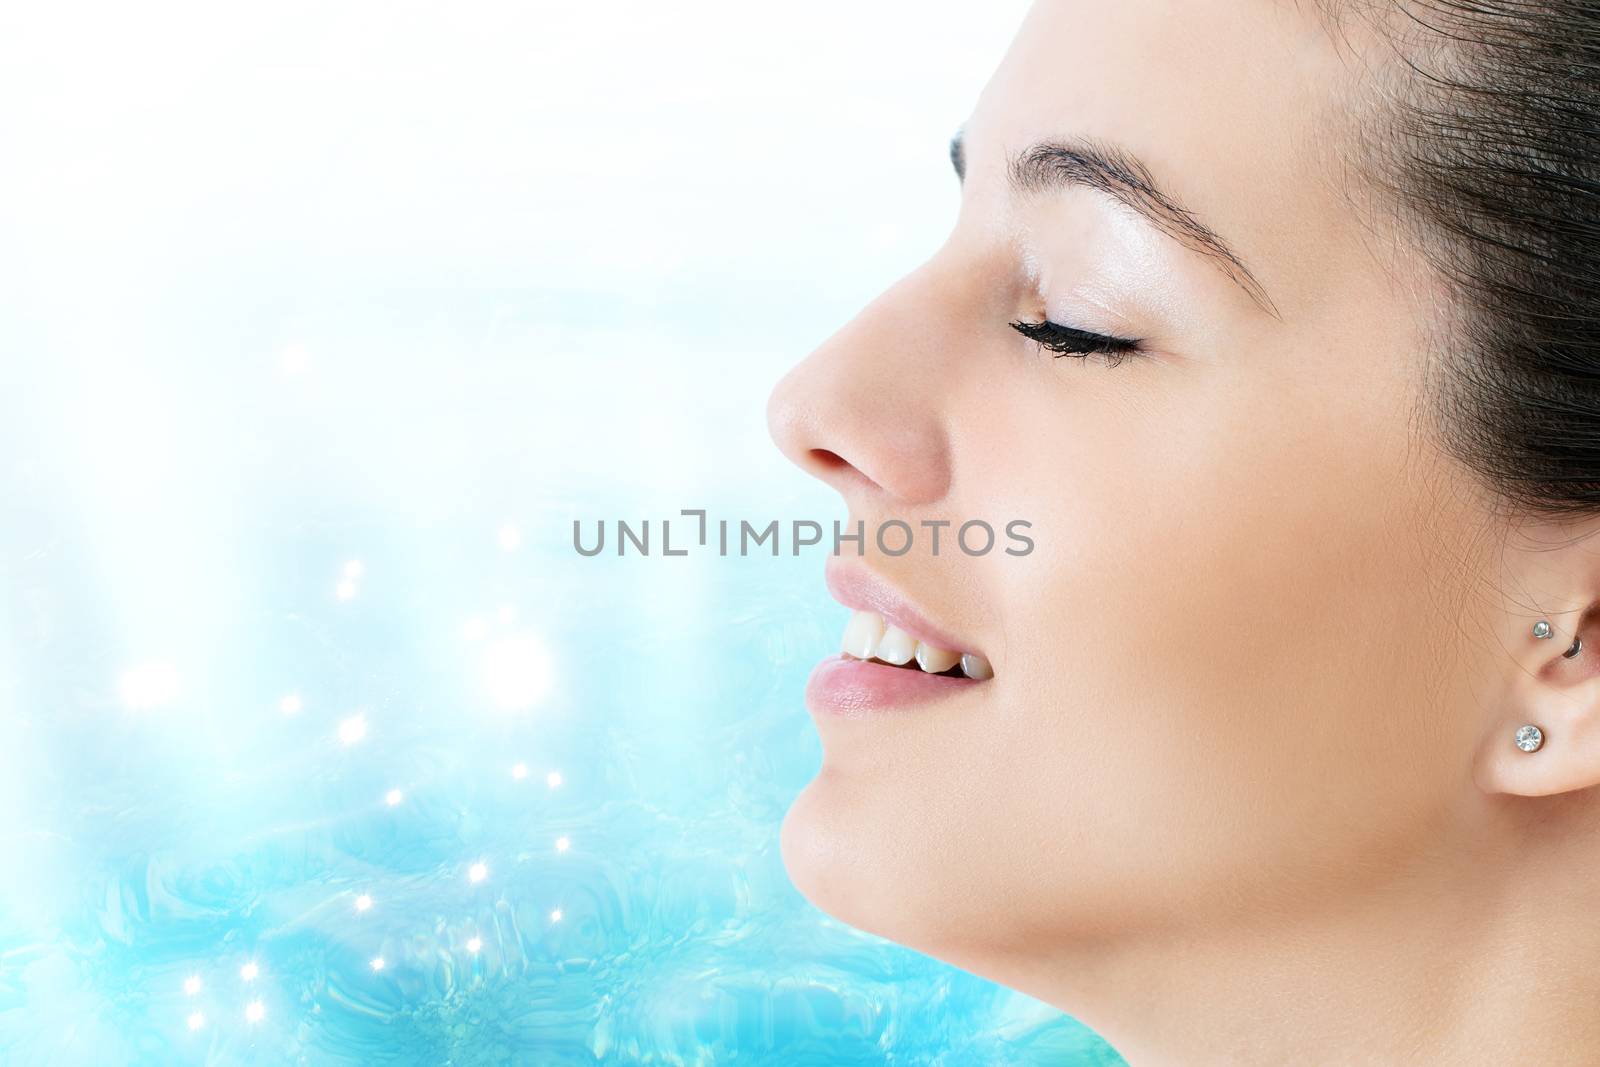 Macro close up side view face shot of young woman with eyes closed.Attractive girl smiling against light blue water background.